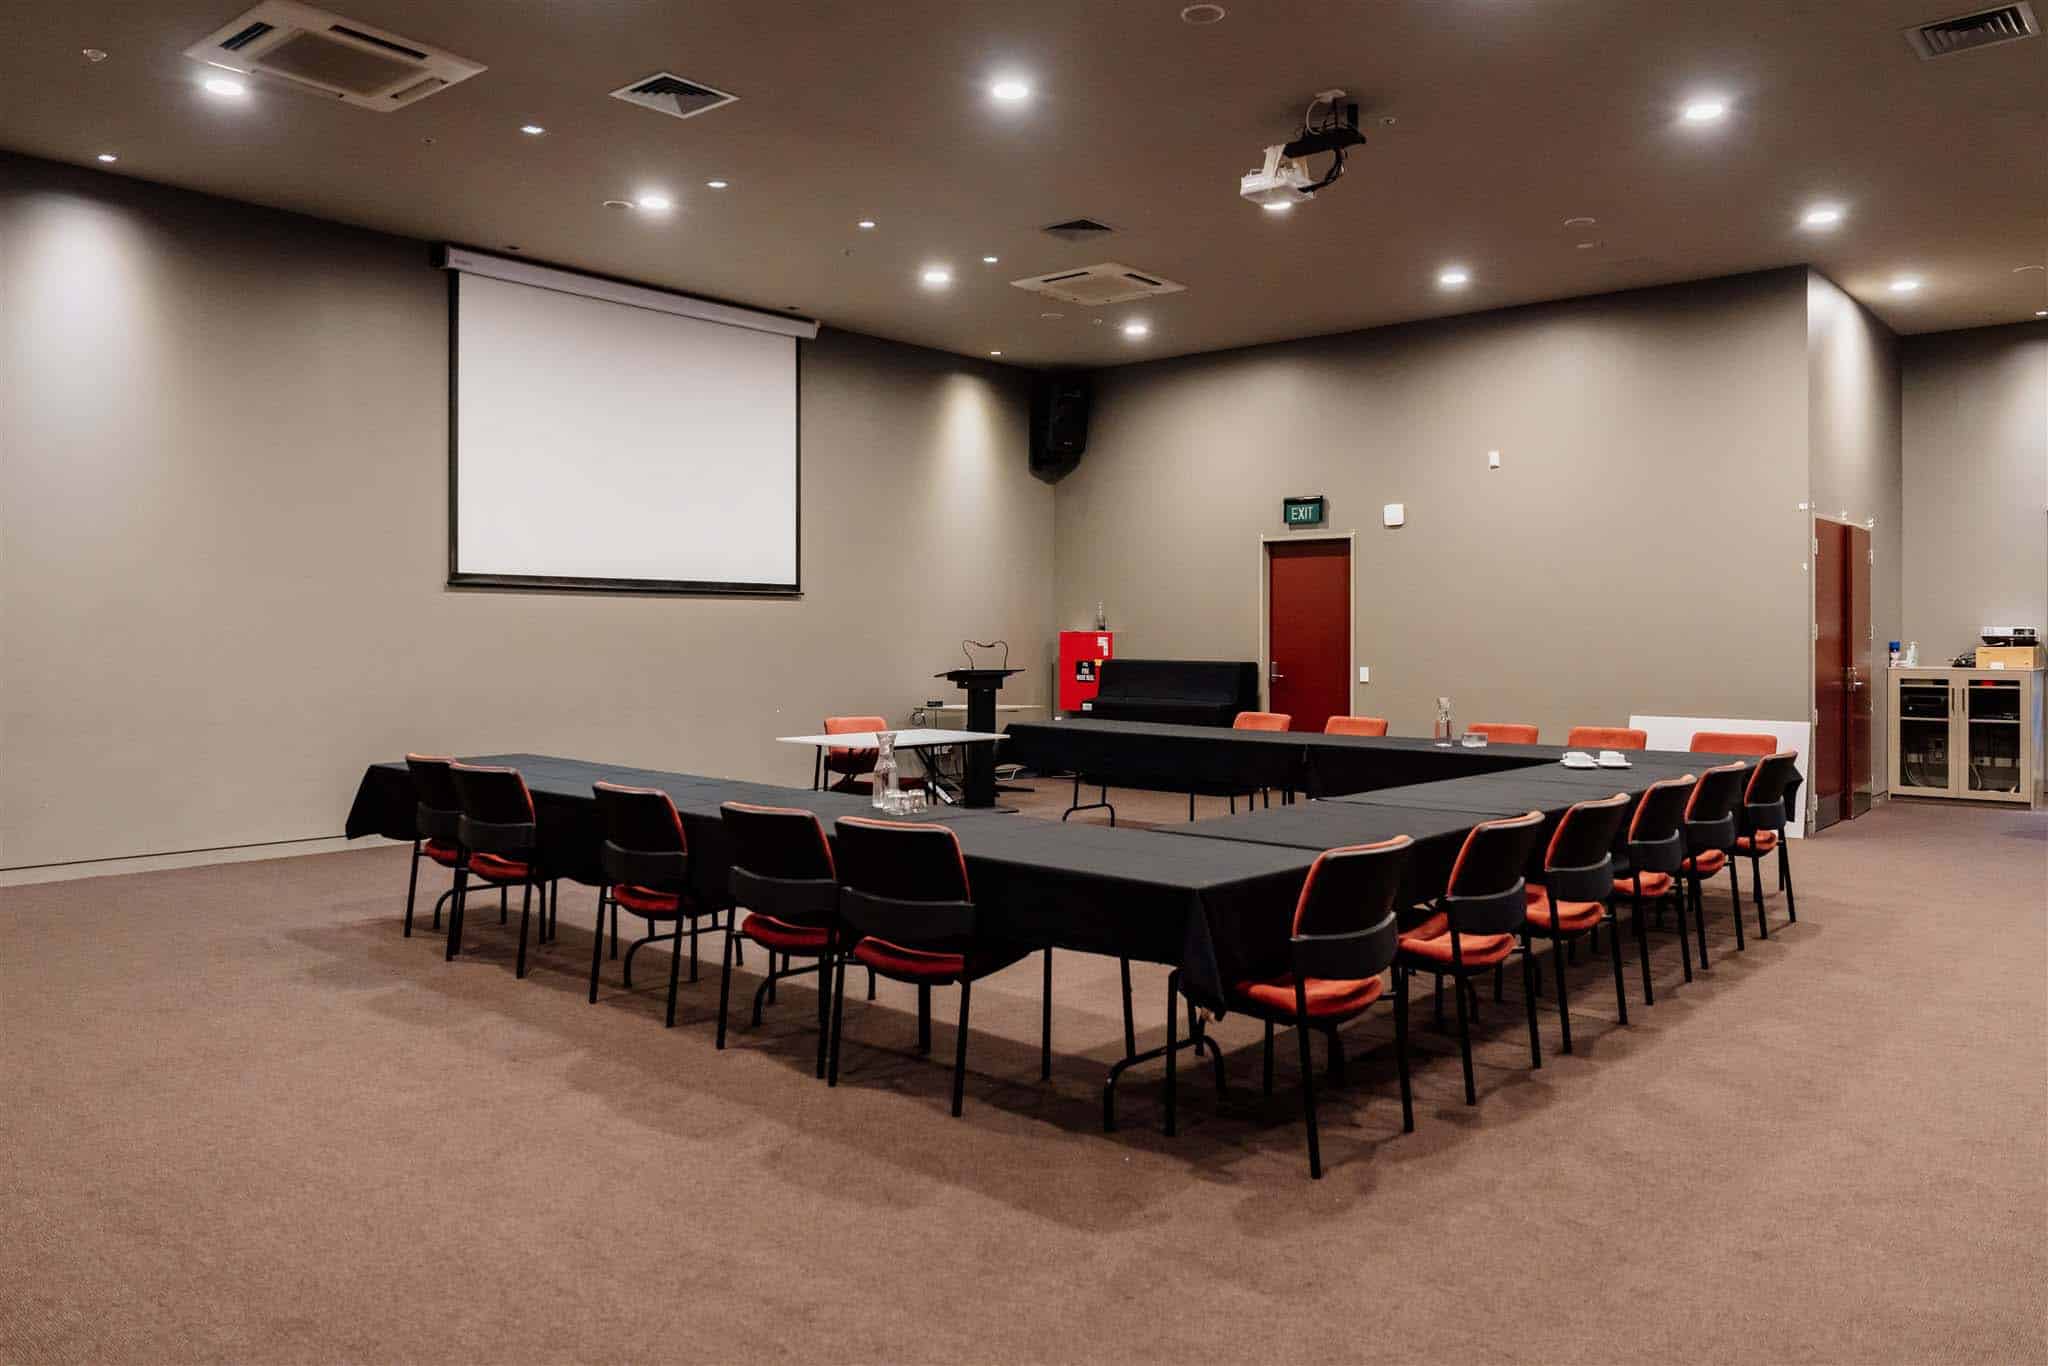 A conference room set up with chairs and a projector screen.